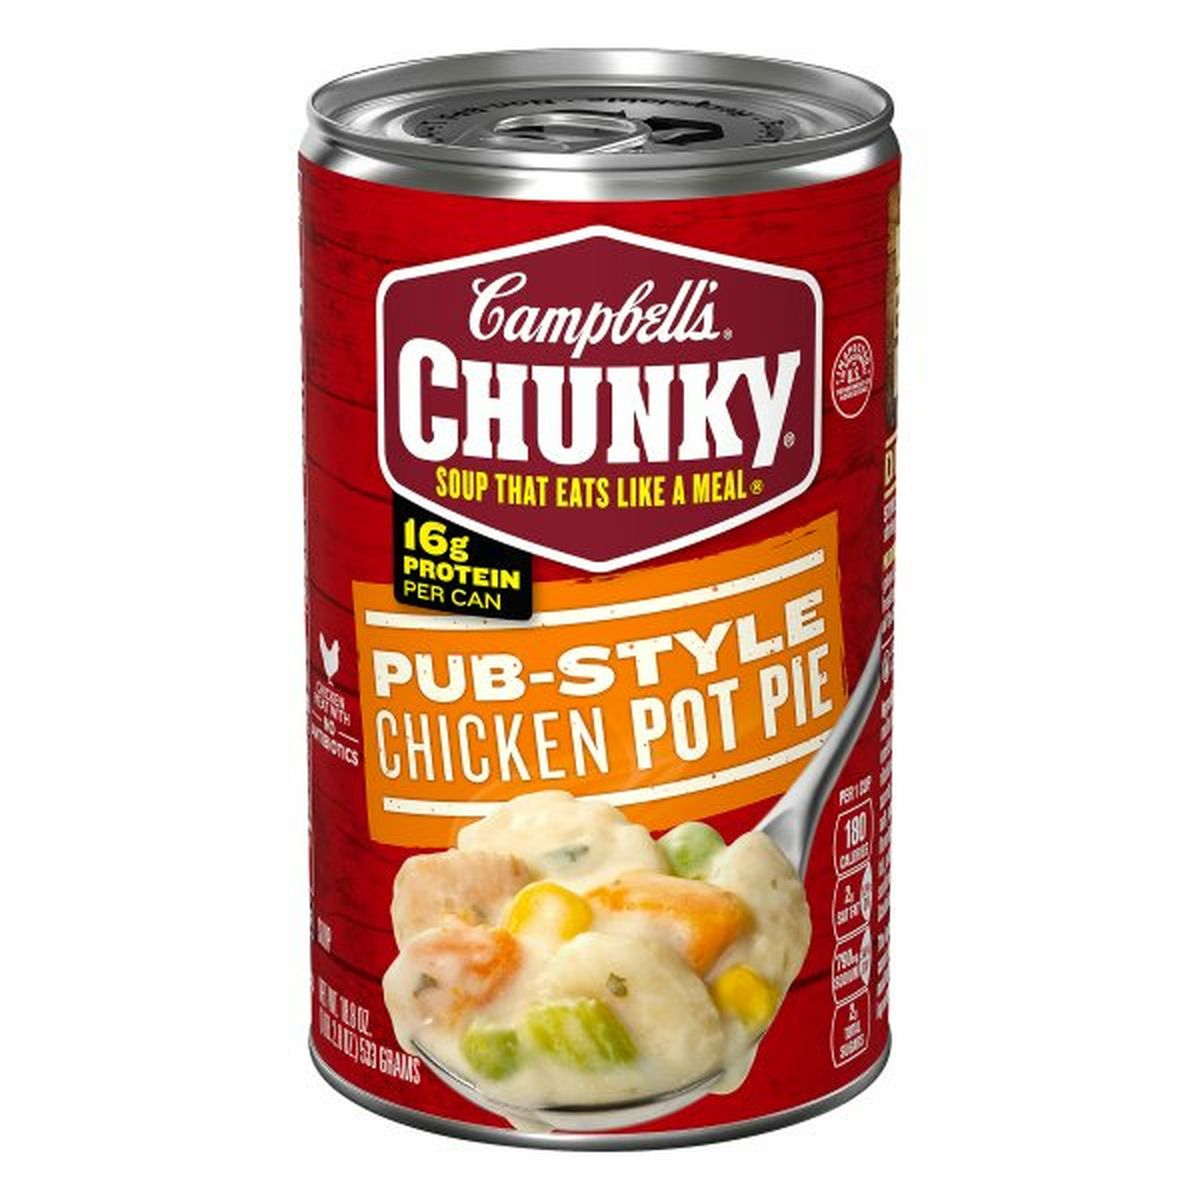 Calories in Campbell'ss Chunkys Soup, Chicken Pot Pie, Pub-Style